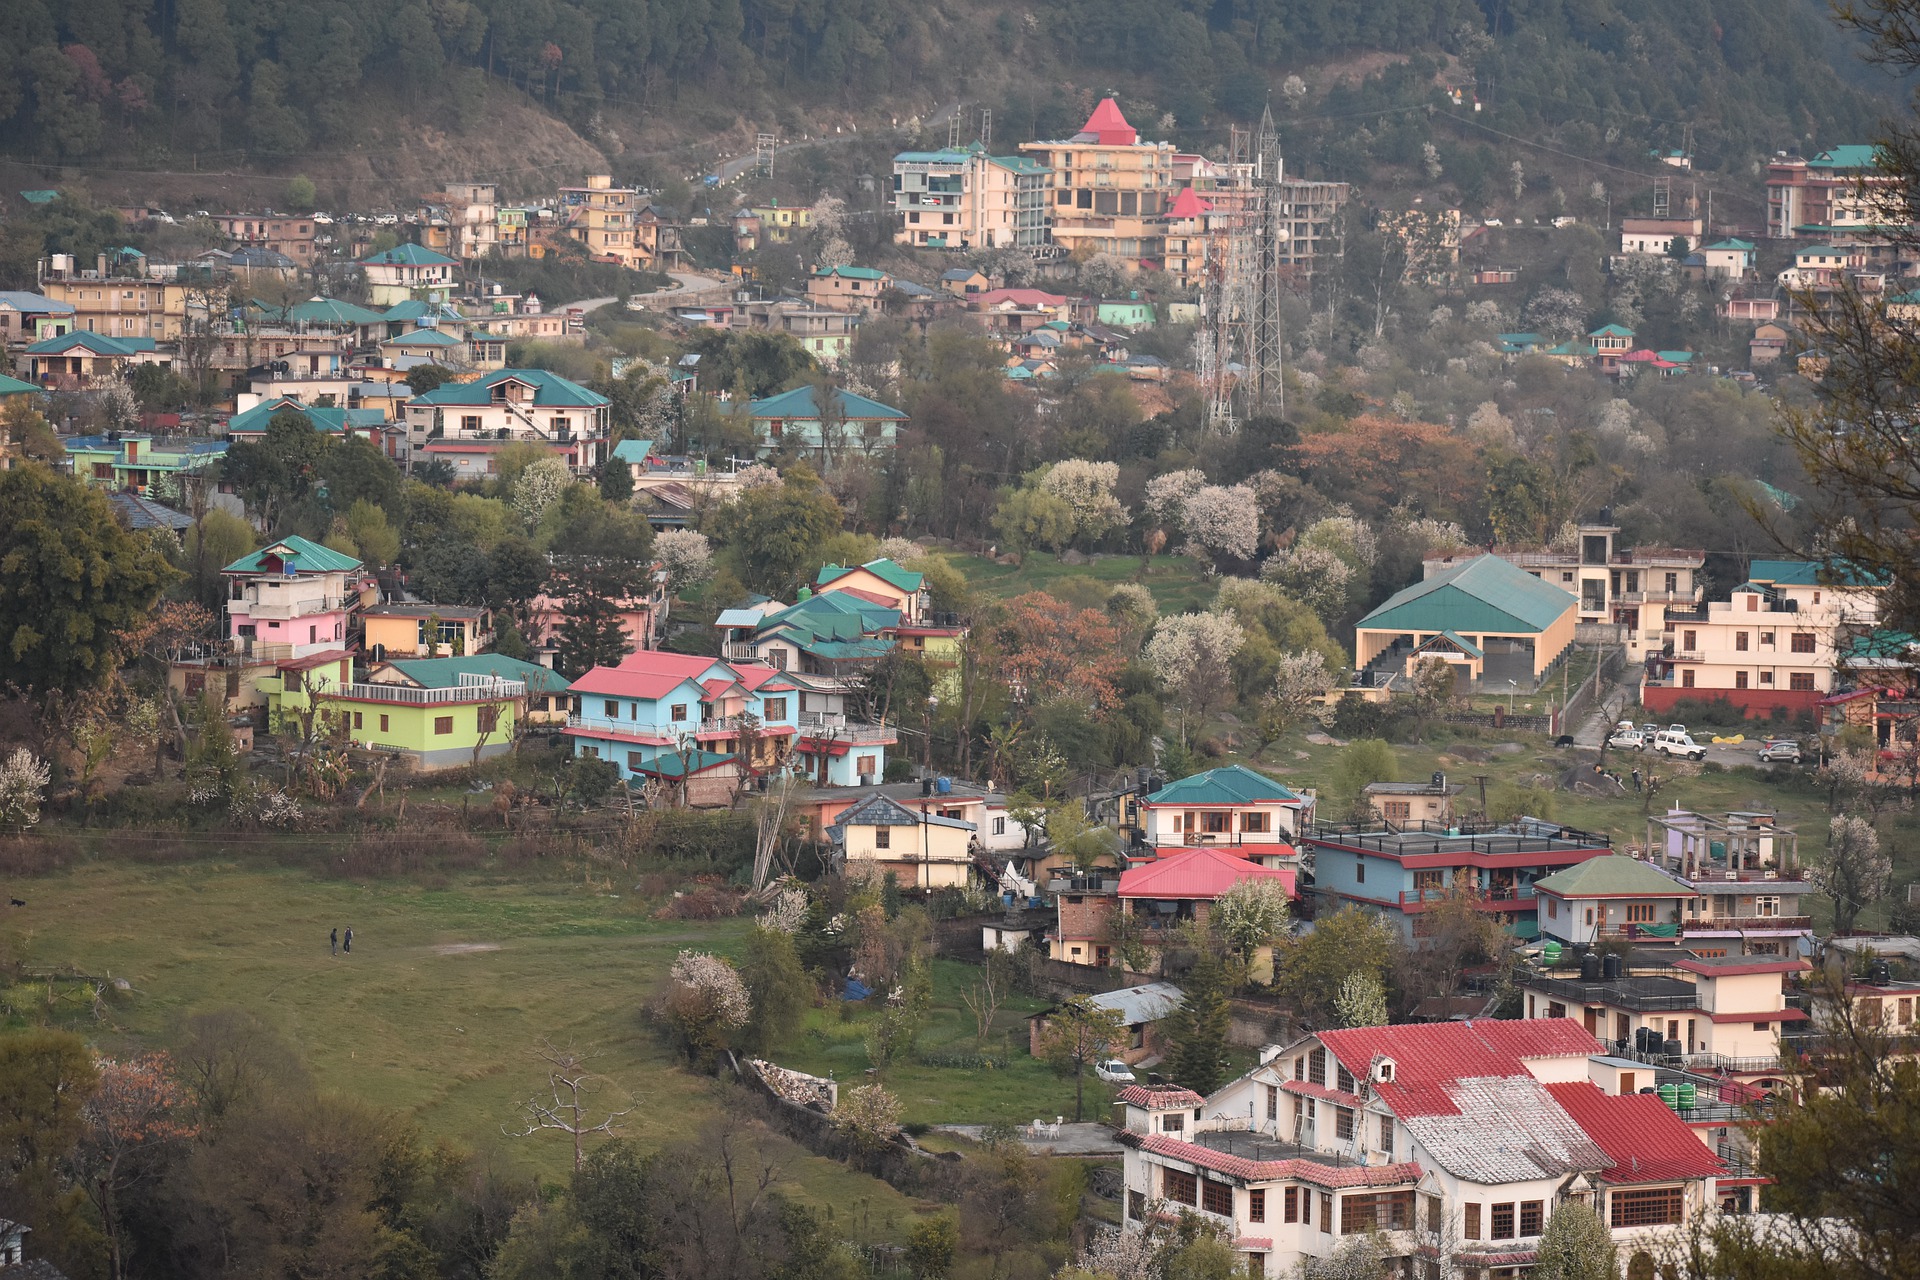 Dharamshala developing at the cost of dense forests